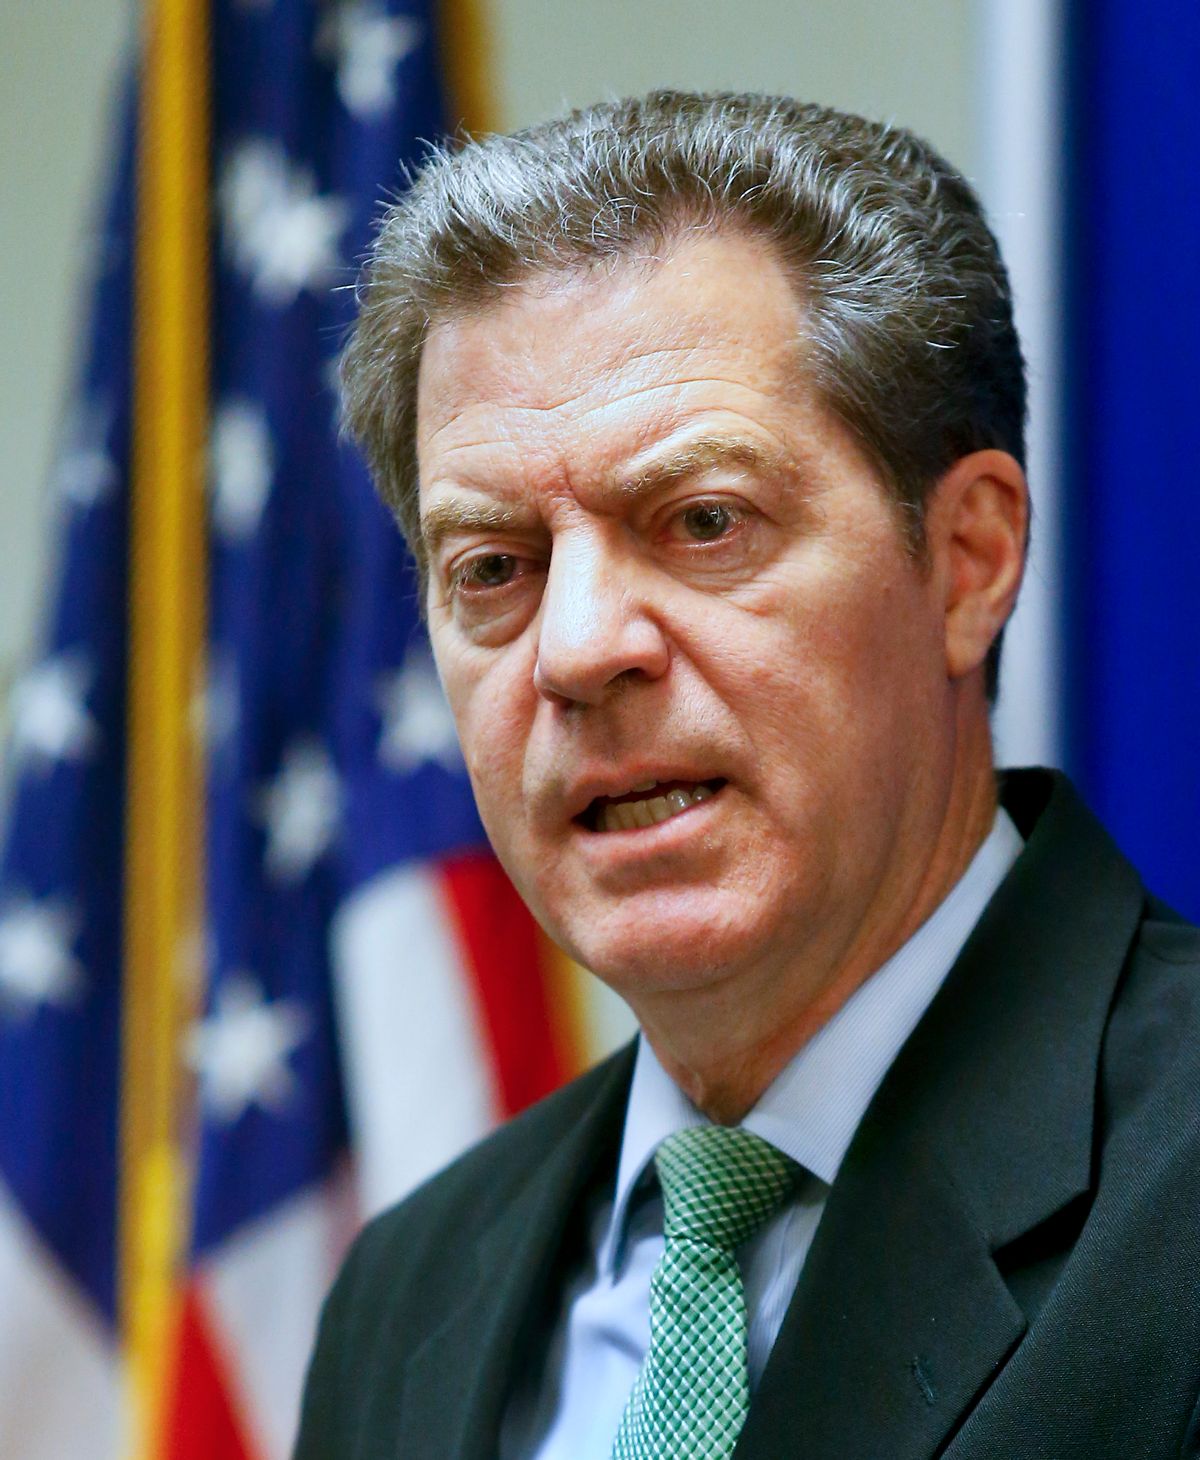 Kansas Gov. Sam Brownback addresses the media about the legislative session during a press conference on Tuesday June 16, 2015, at the Kansas Statehouse in Topeka, Kan.  (Chris Neal/The Topeka Capital-Journal via AP) (AP)